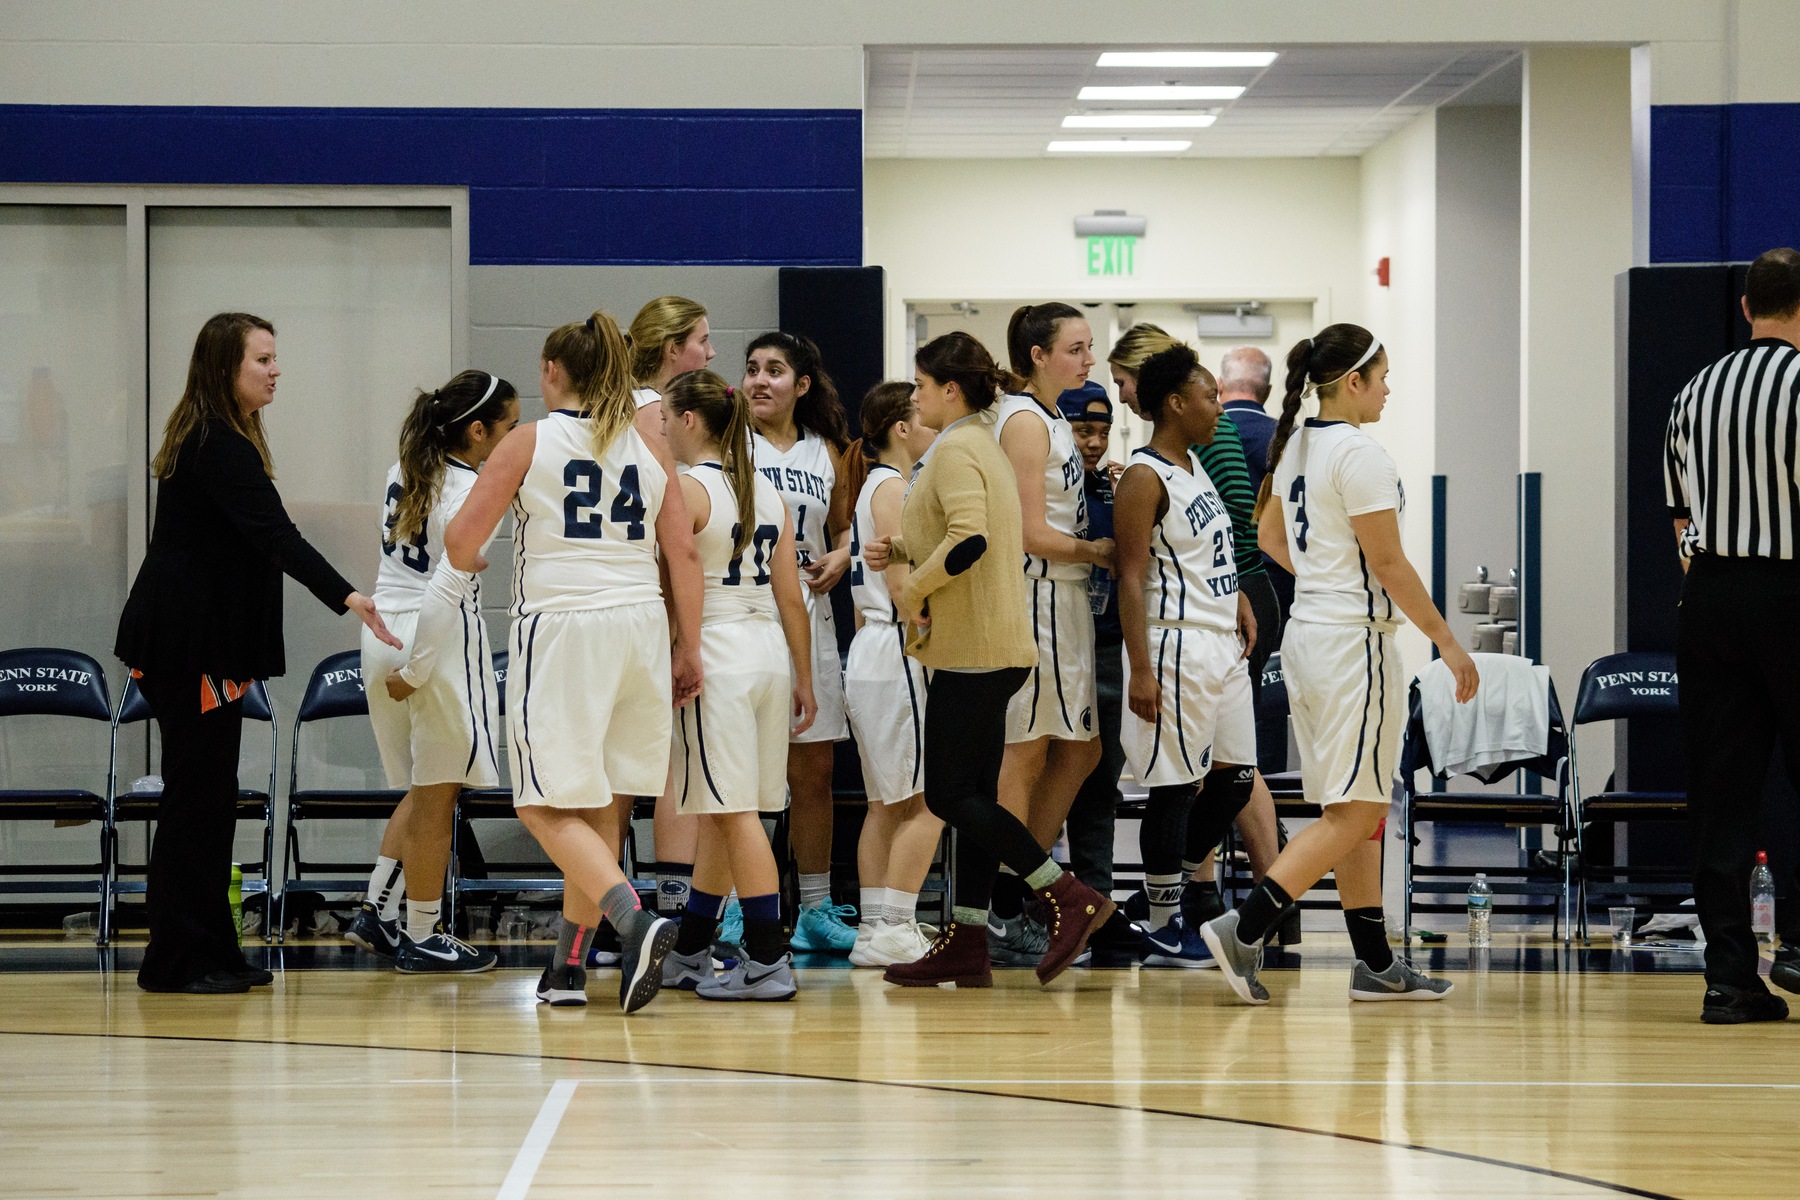 Penn State York Women’s Basketball at the conclusion of a game earlier this season.